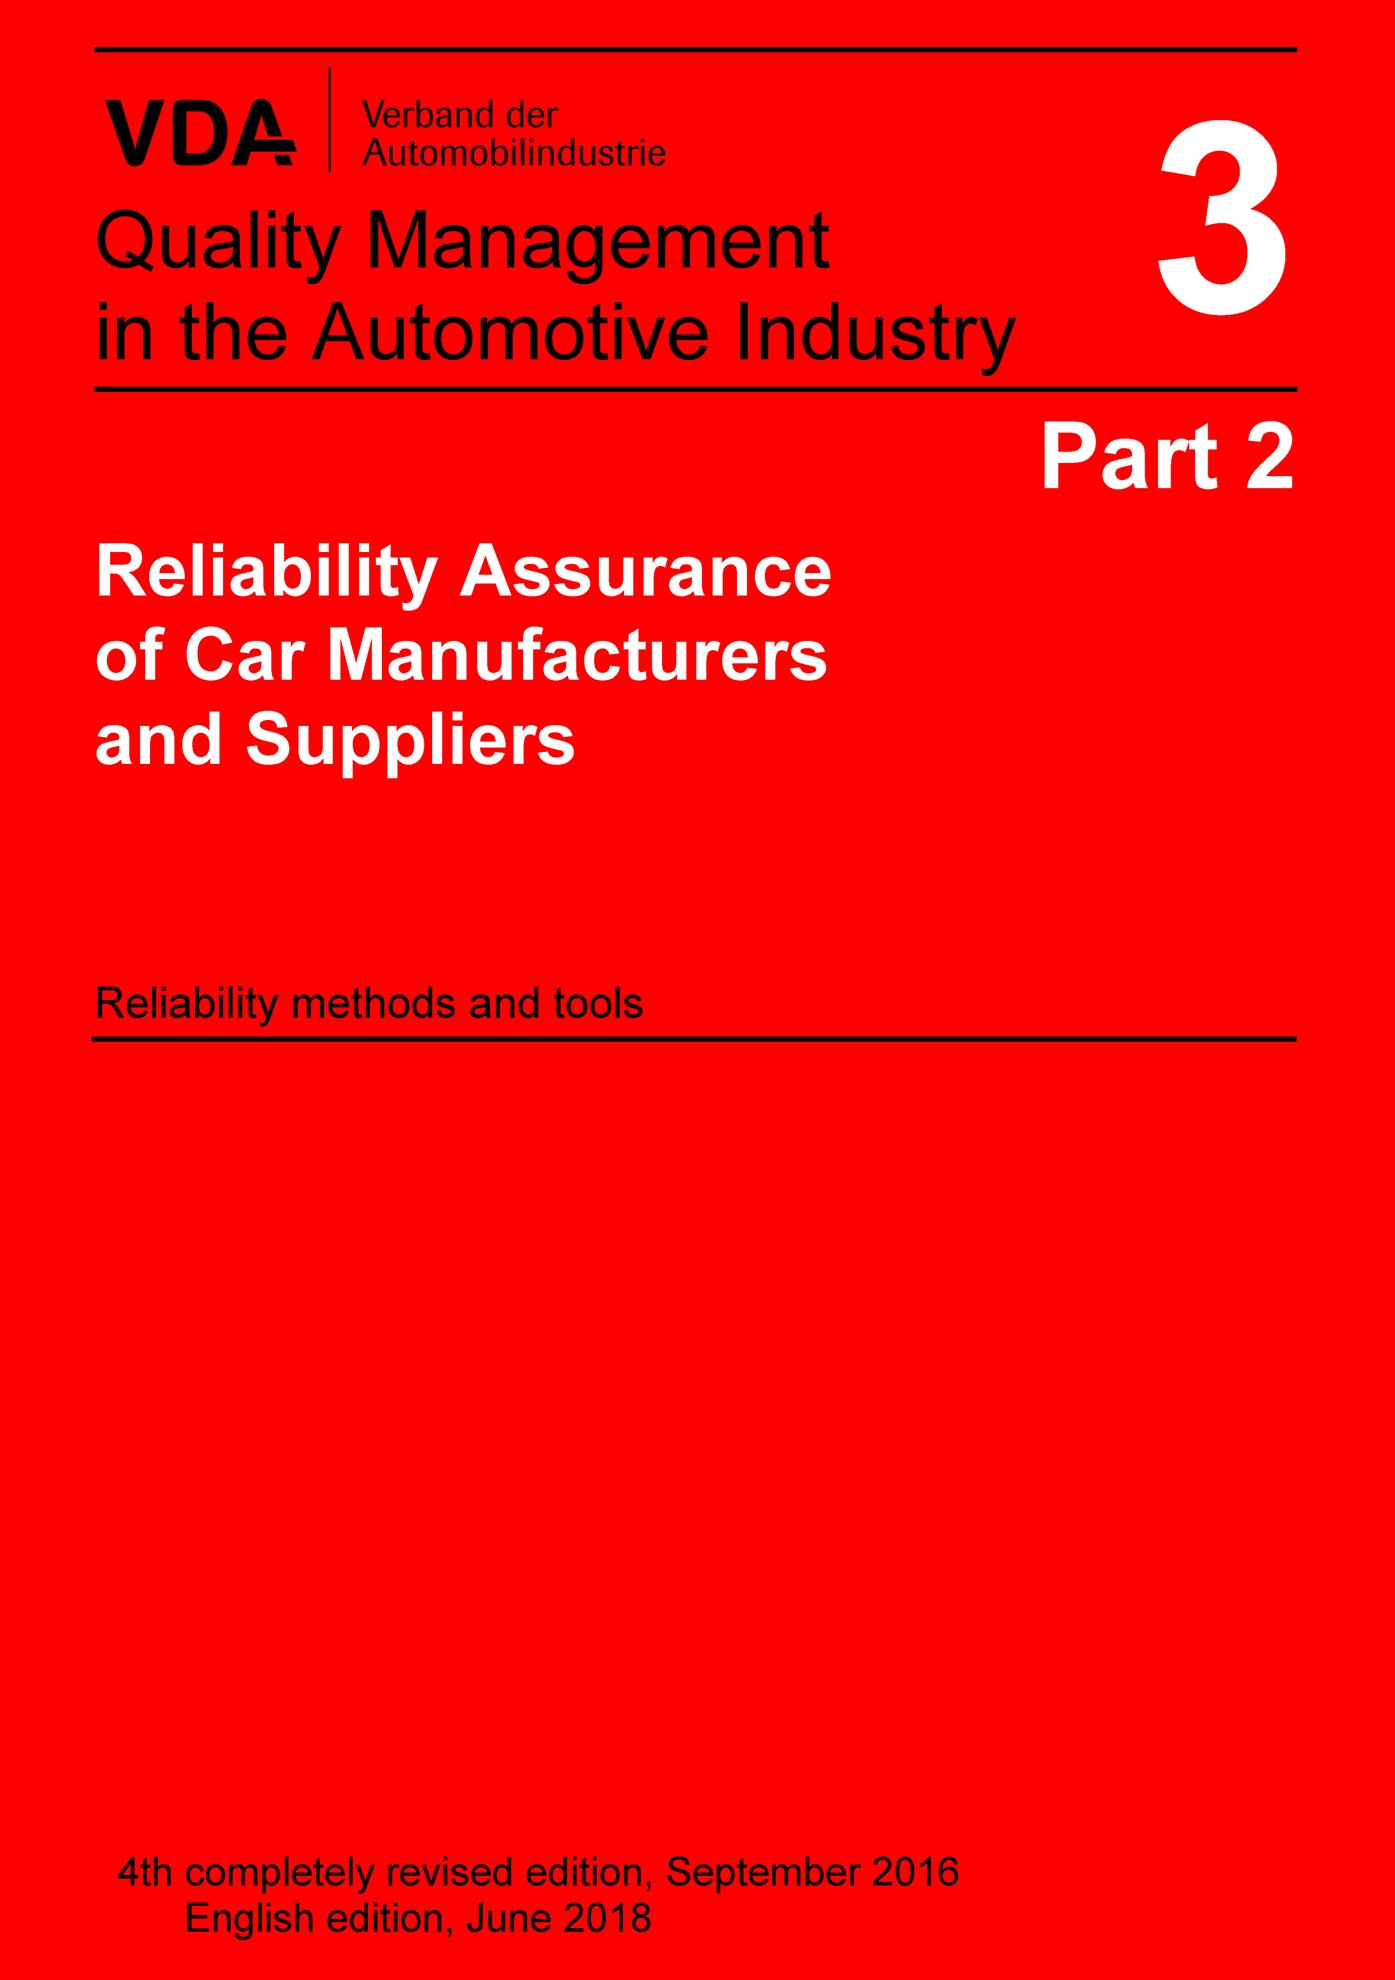 Náhľad  VDA Volume 3 Part 2, 4th completely revised edition 2016 Reliability Assurance of Car Manufacturers and Suppliers 
 Reliability methods and tools 1.1.2016